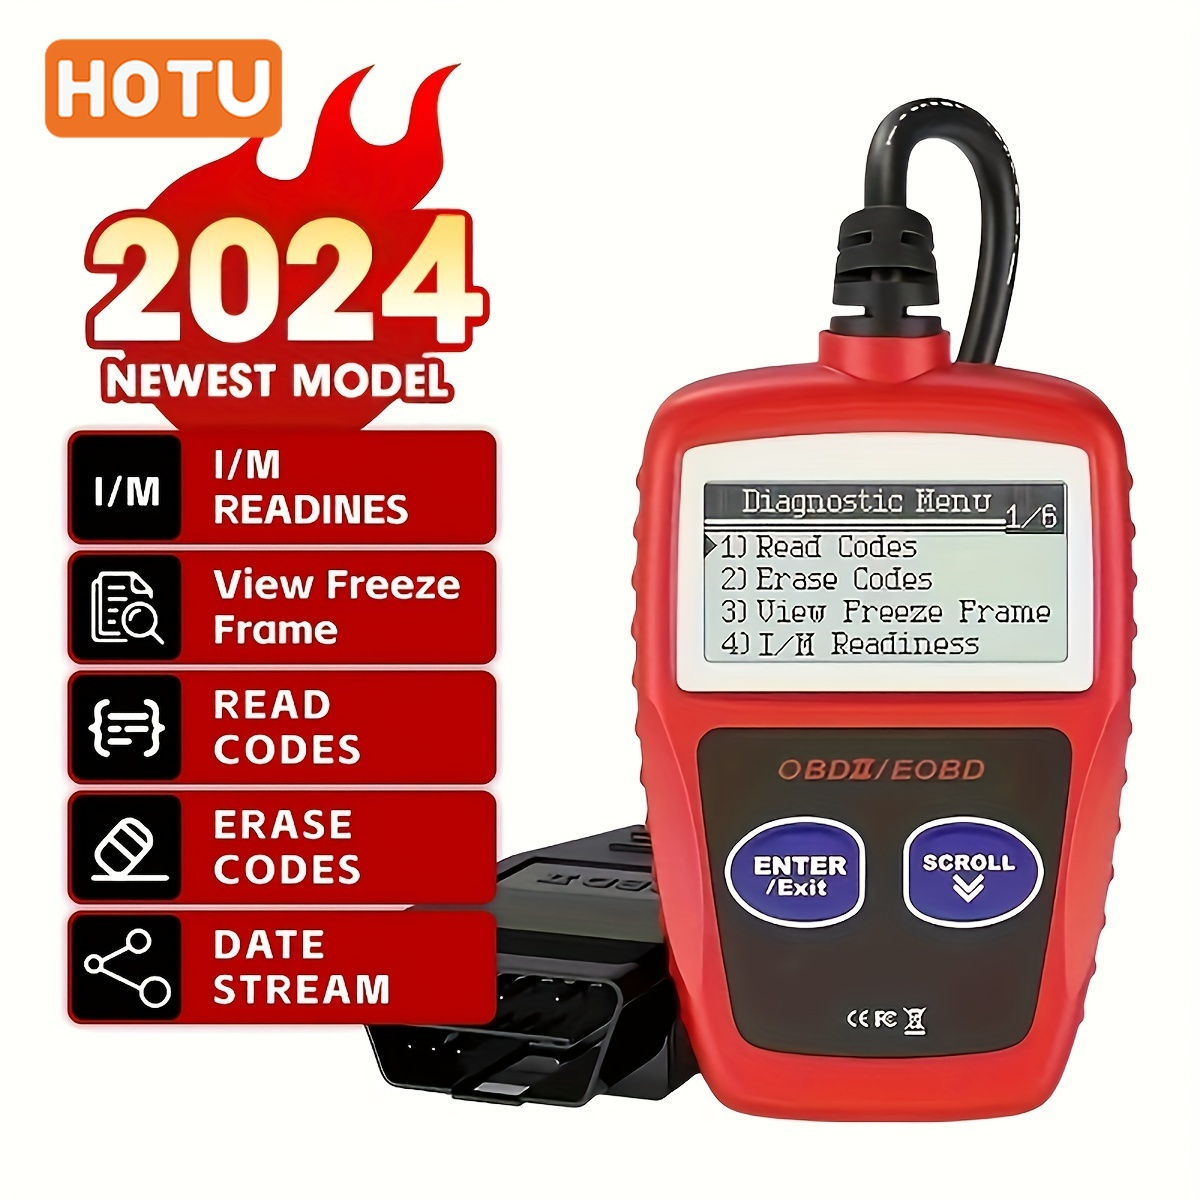 

Hotu Ms309 Upgraded Obd2 Scanner - Car Diagnostic Tool, Fault Code Reader, No Battery Required, Durable Pvc Construction